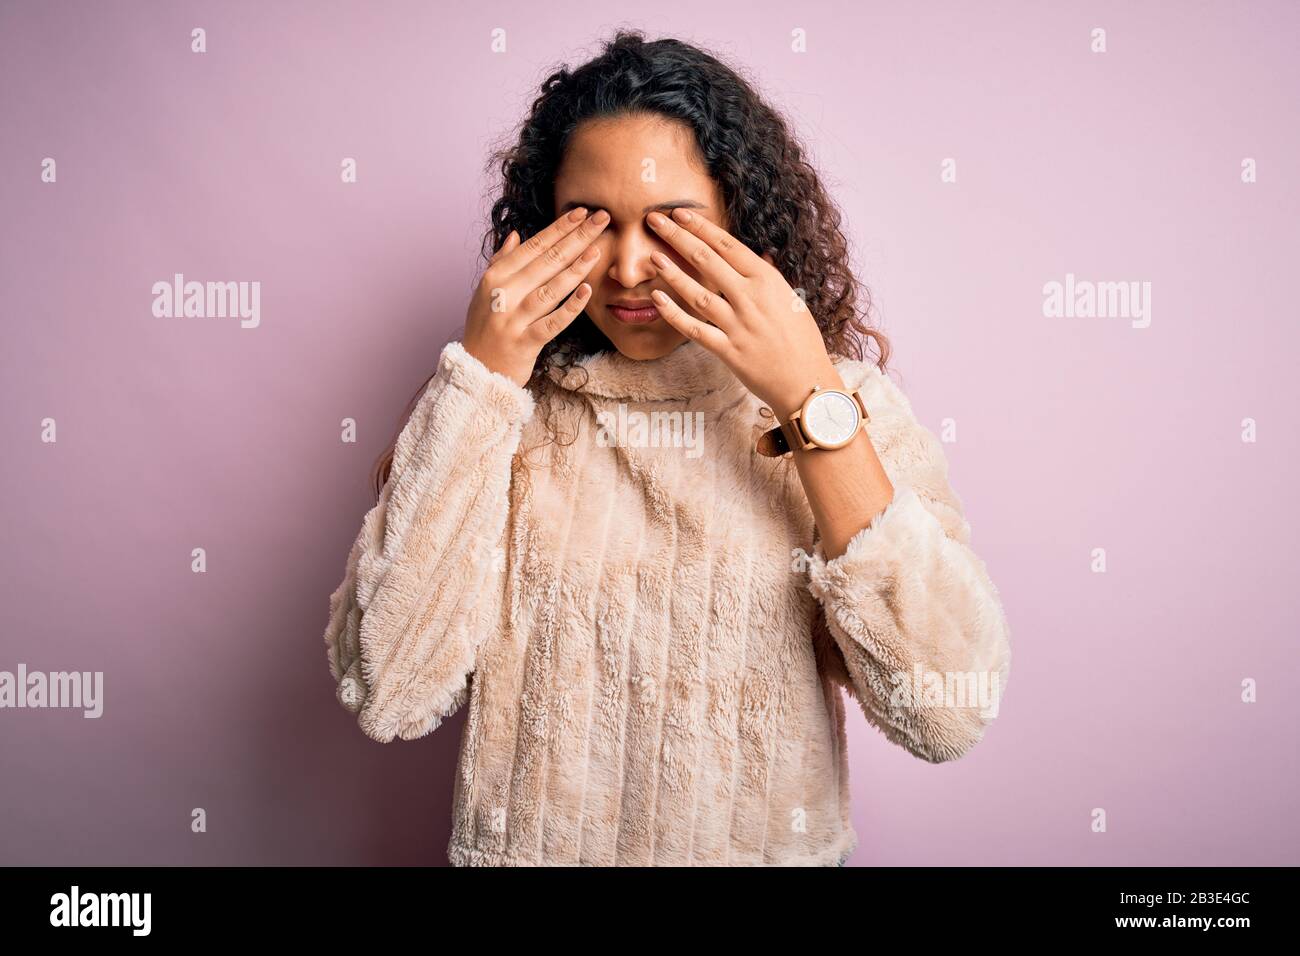 Young beautiful woman with curly hair wearing casual sweater standing over pink background rubbing eyes for fatigue and headache, sleepy and tired exp Stock Photo